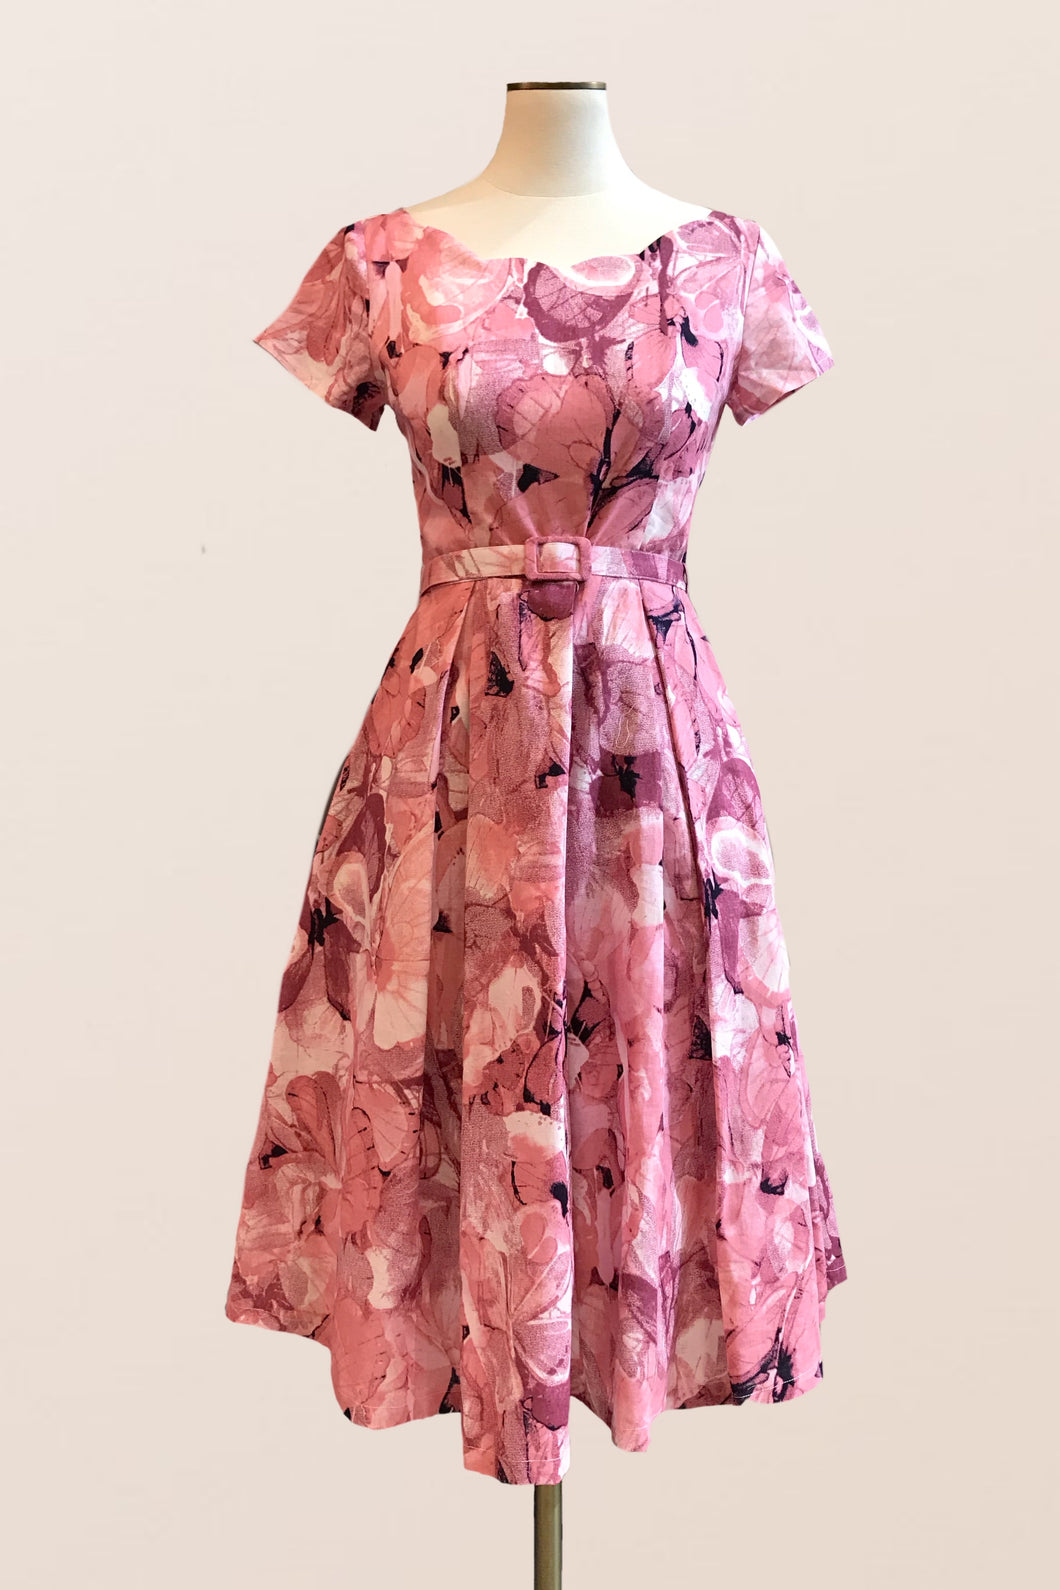 Laura Dusty Pink Floral Dress